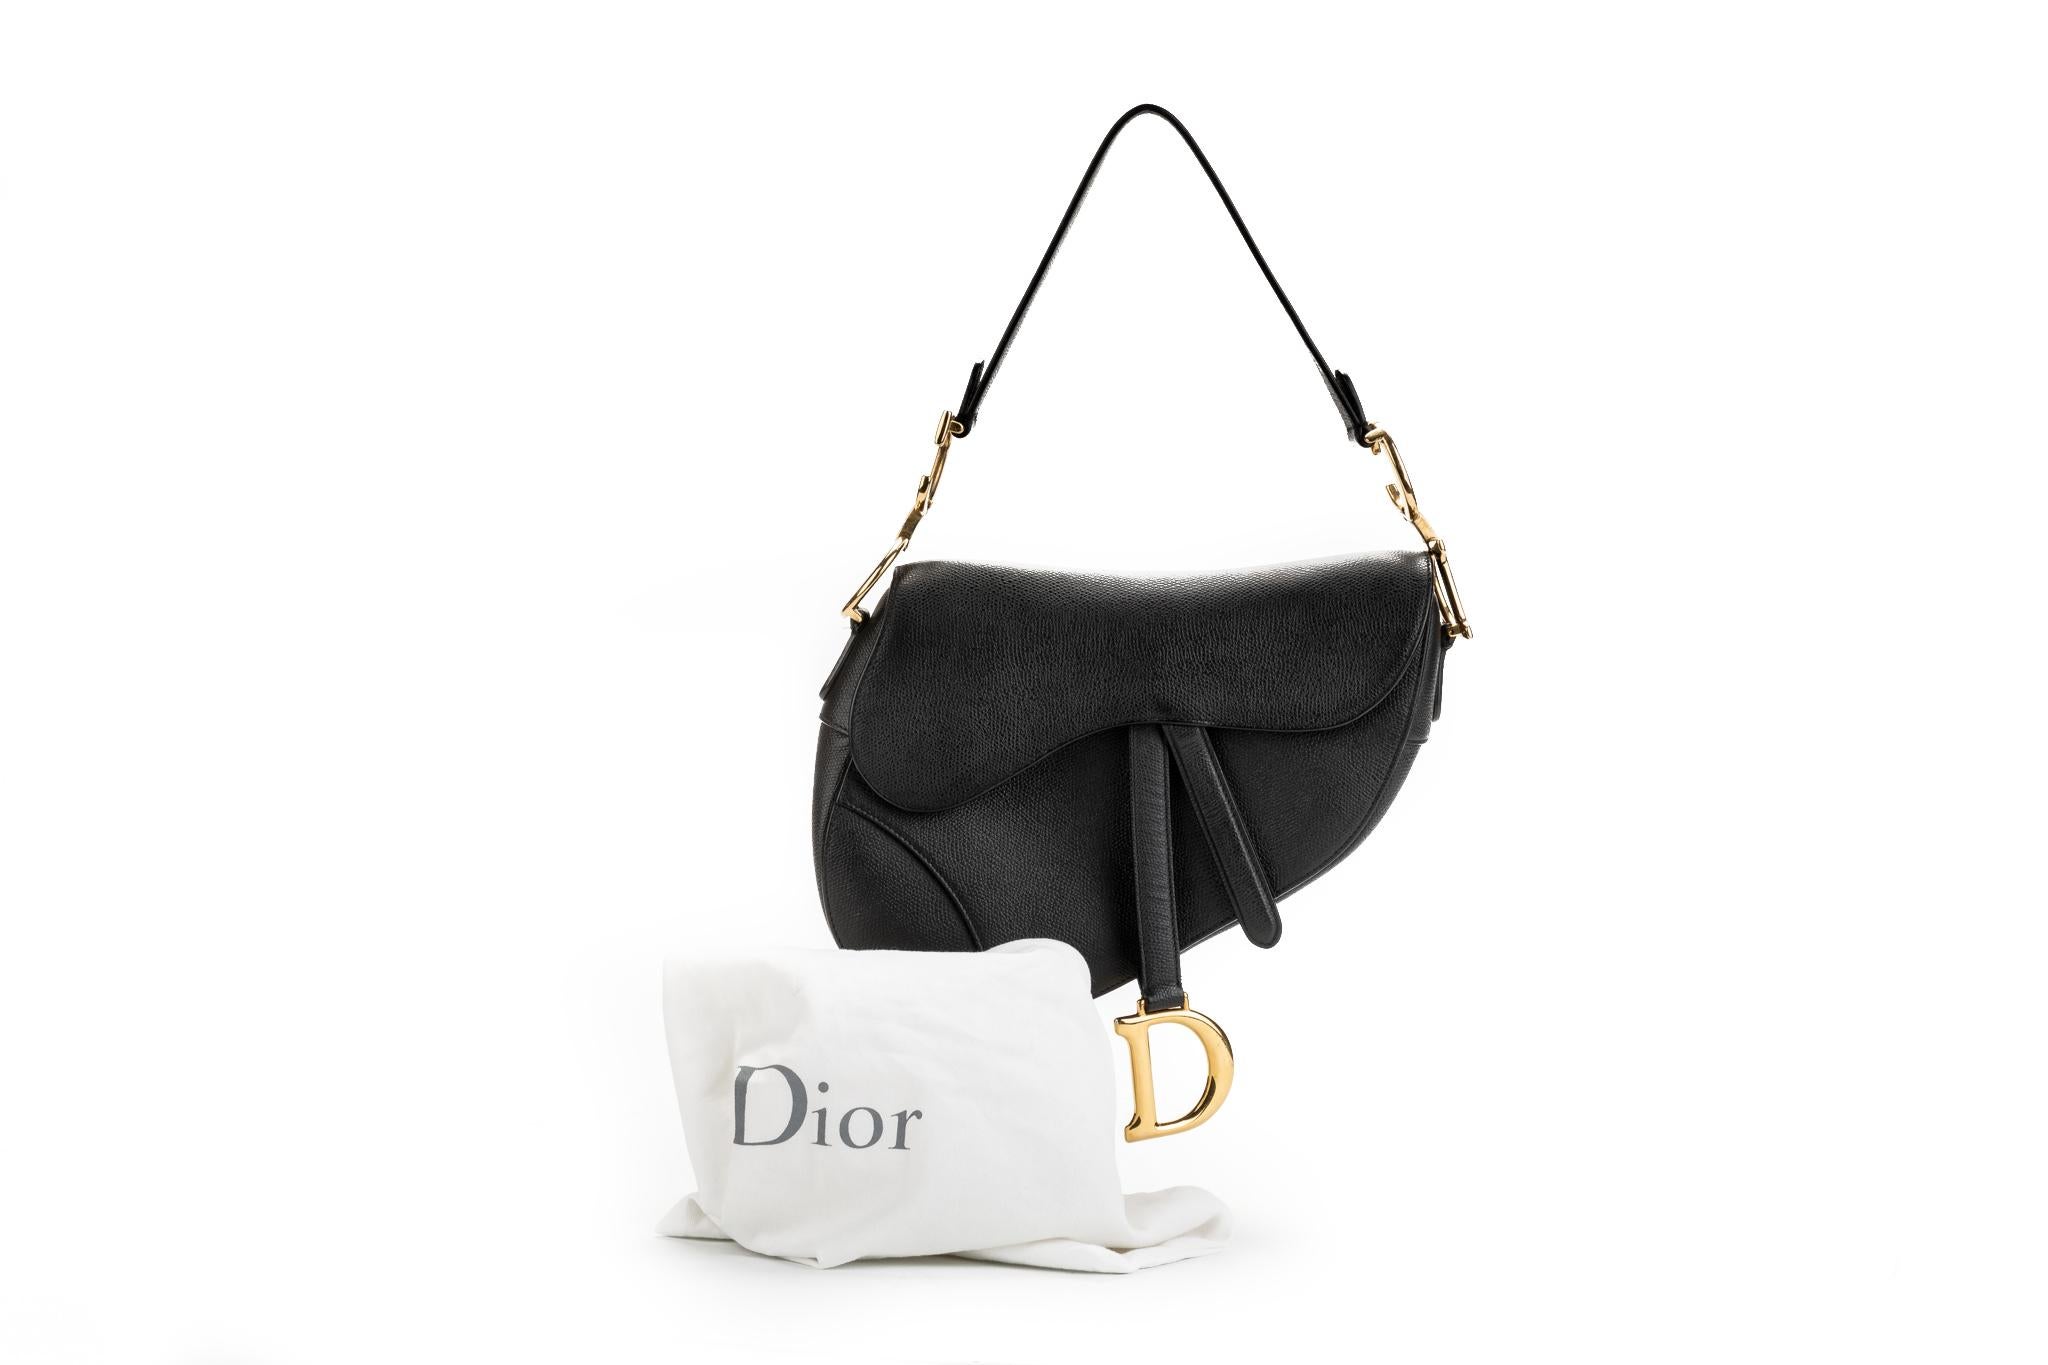 Christian Dior brand new black calfskin saddle bag with gold tone hardware. Comes with serial number and original dust cover.
